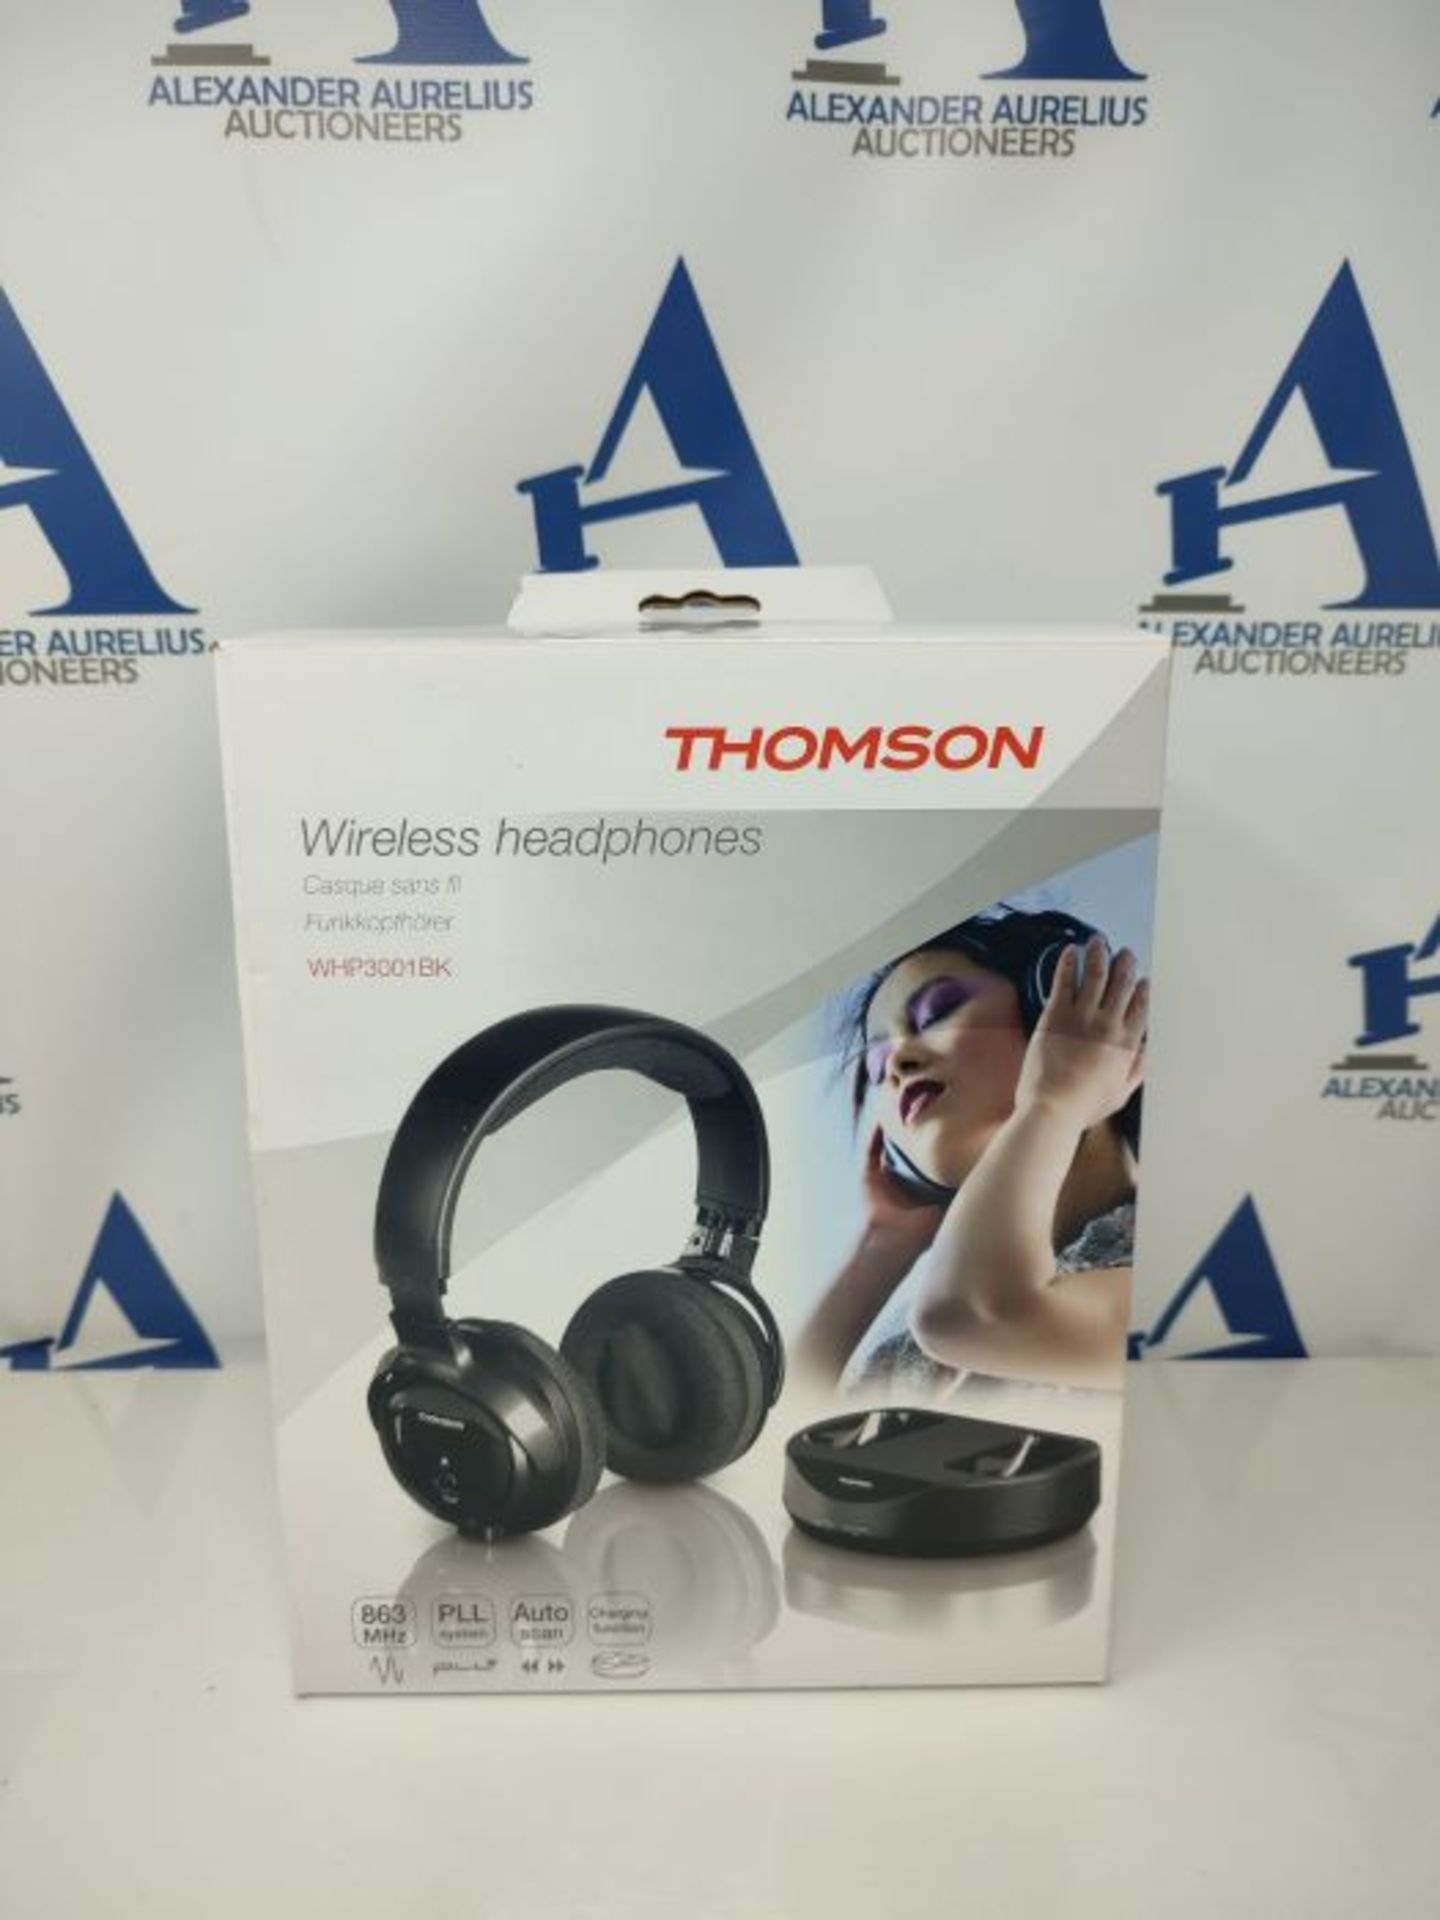 Thomson WHP 3001 Wireless Headphones for Portable Music Players 863 MHz, Black - Image 2 of 3